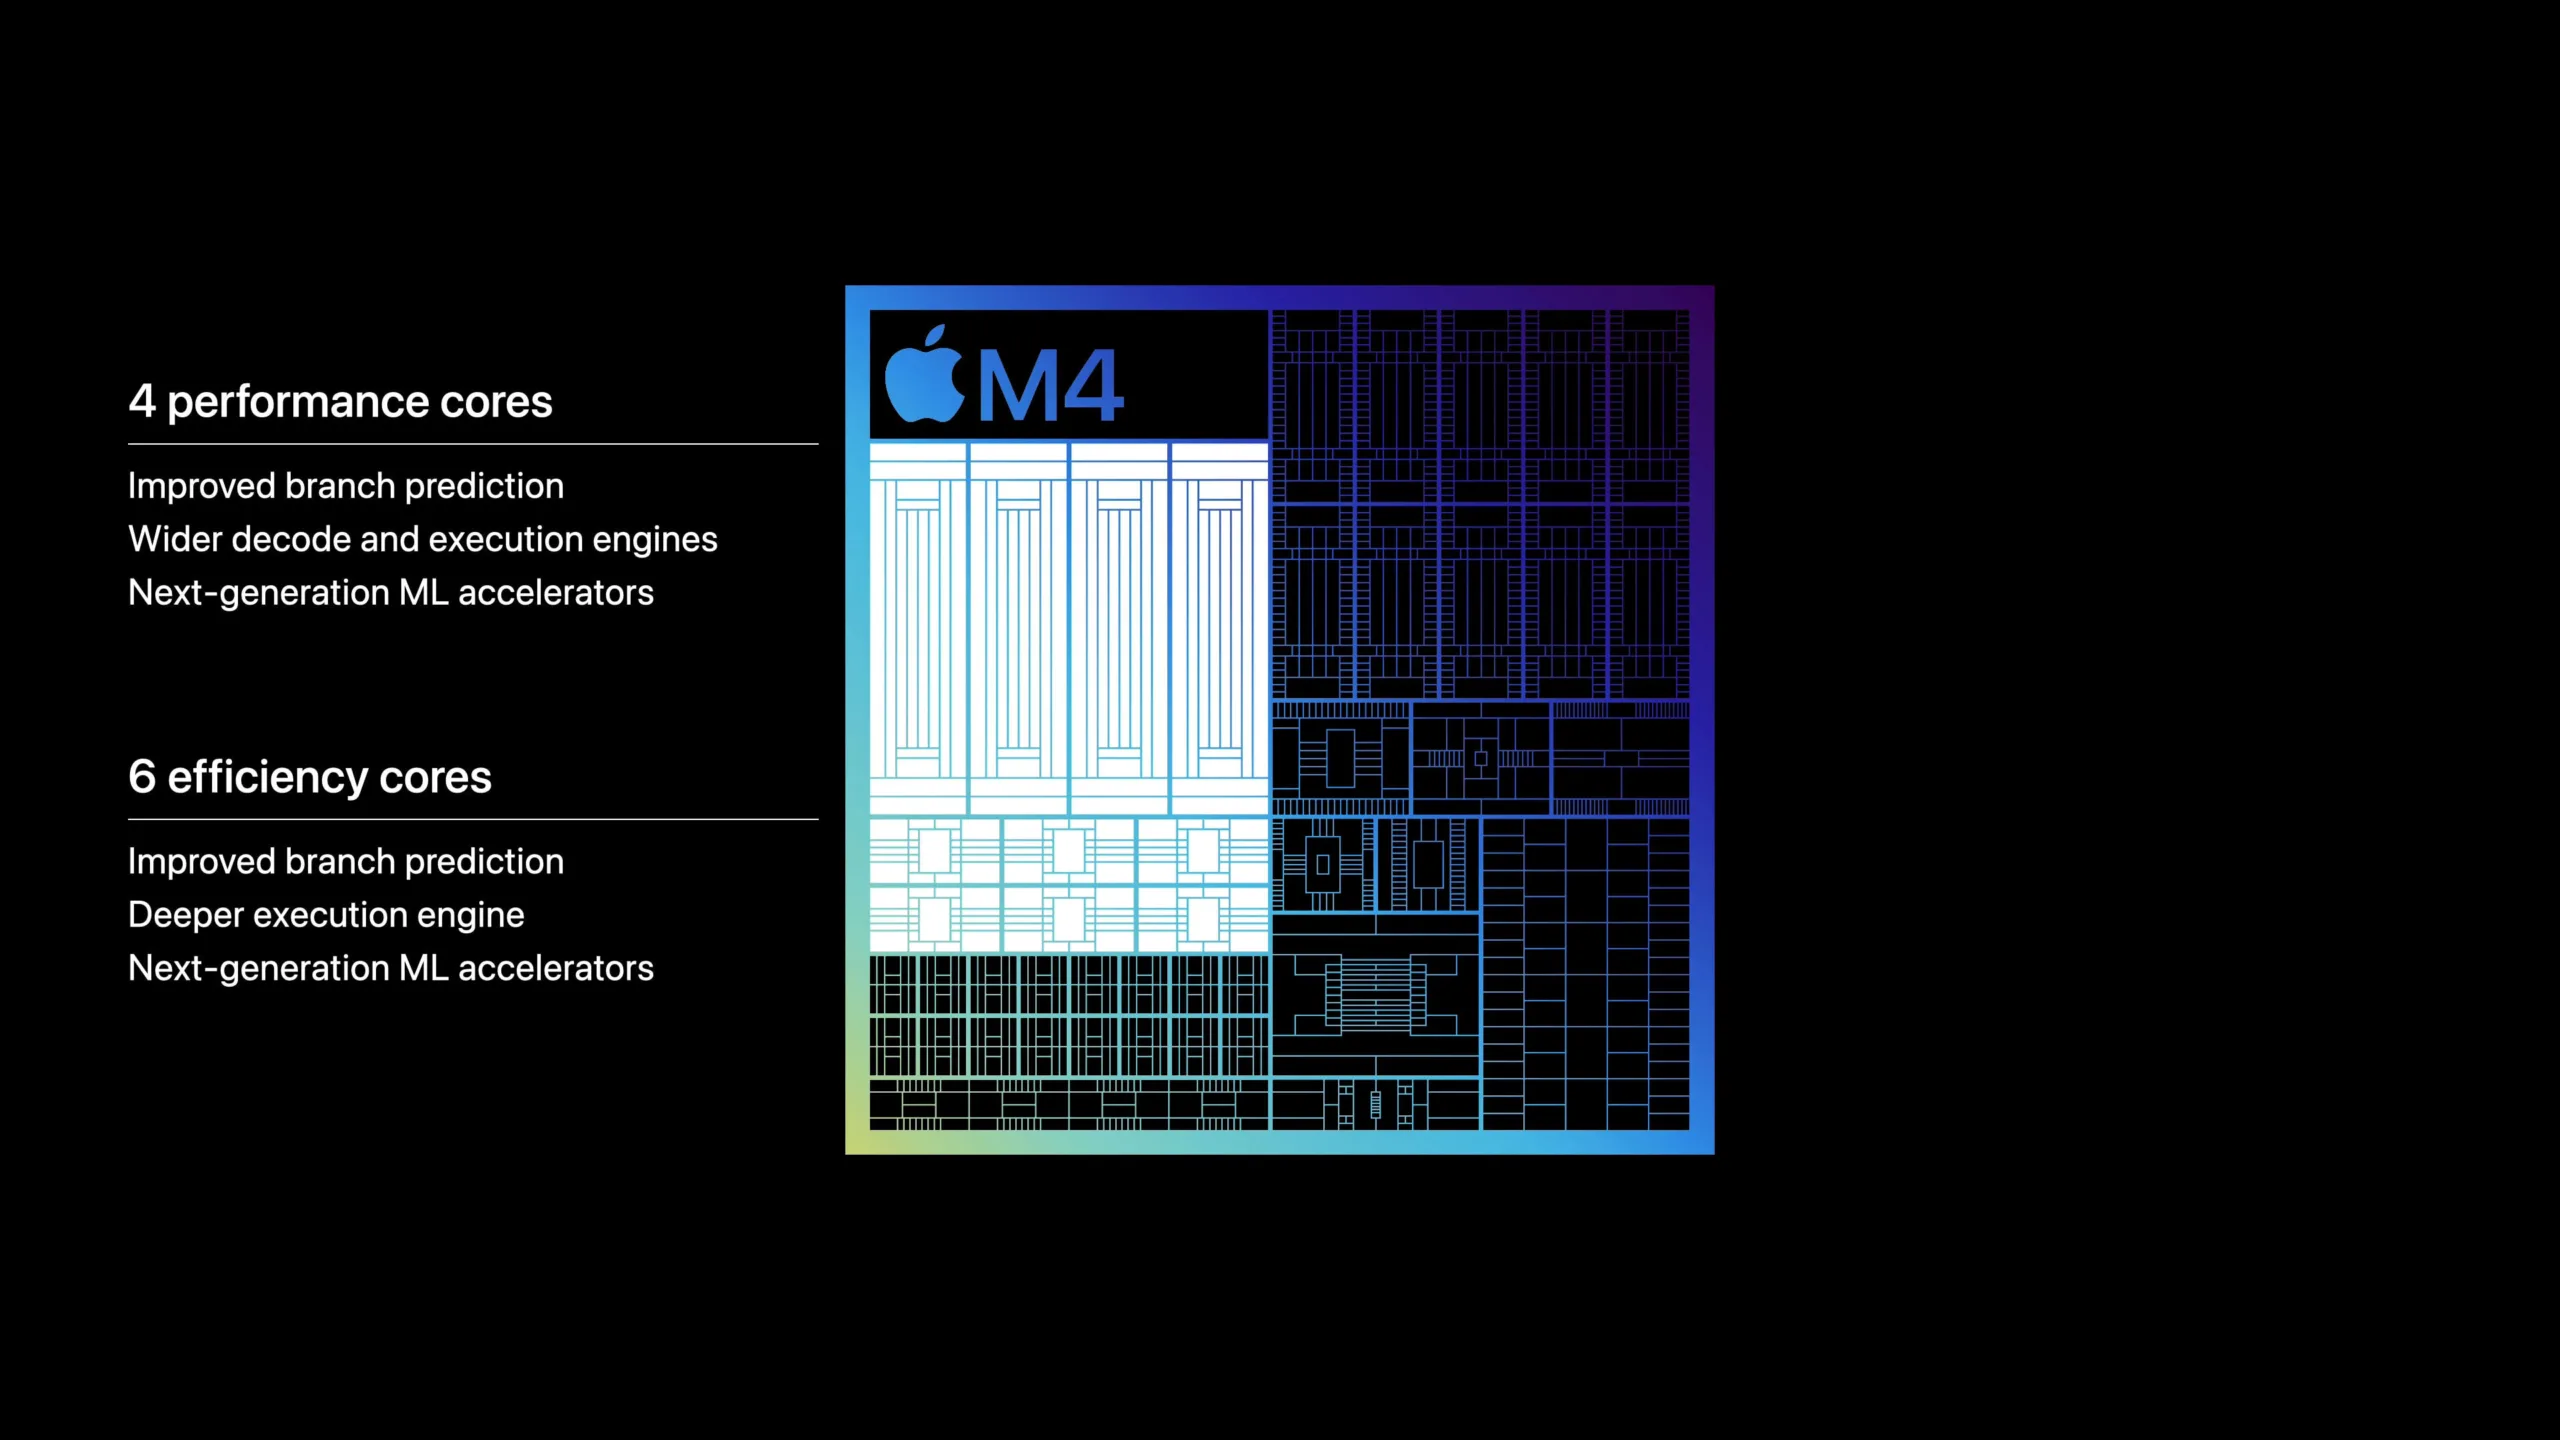 The new CPU of M4 delivers up to 1.5x faster CPU performance over the powerful M2 in the previous iPad Pro.